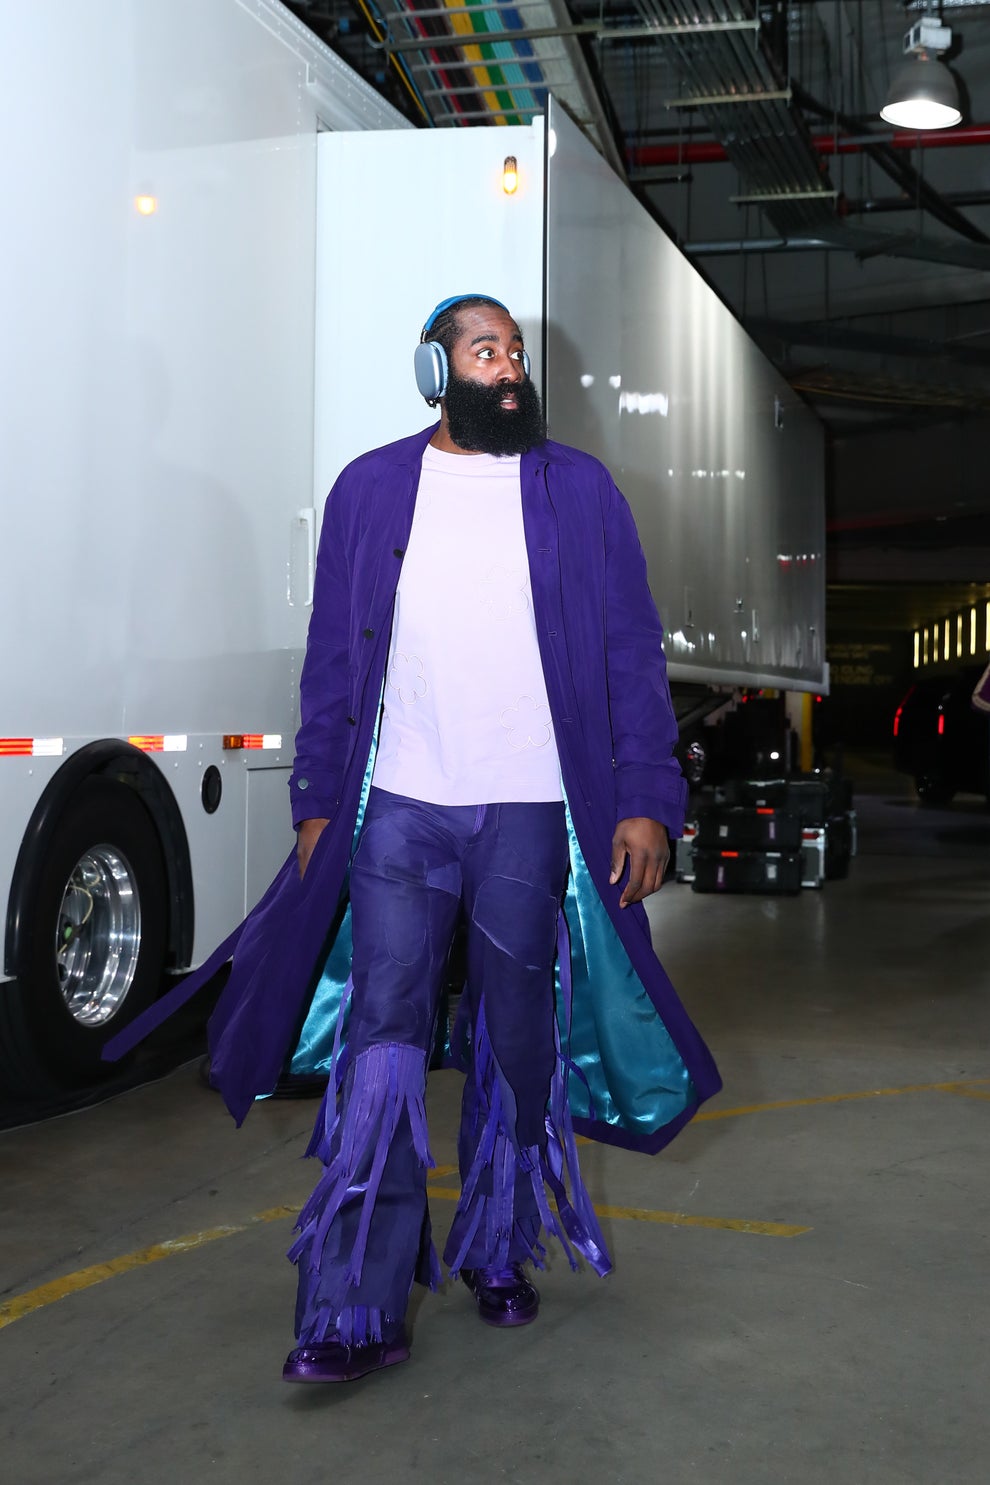 Harden brought out the fuzzy slippers for Game 5. 🔥😂 #76ers #harden , harden  outfit